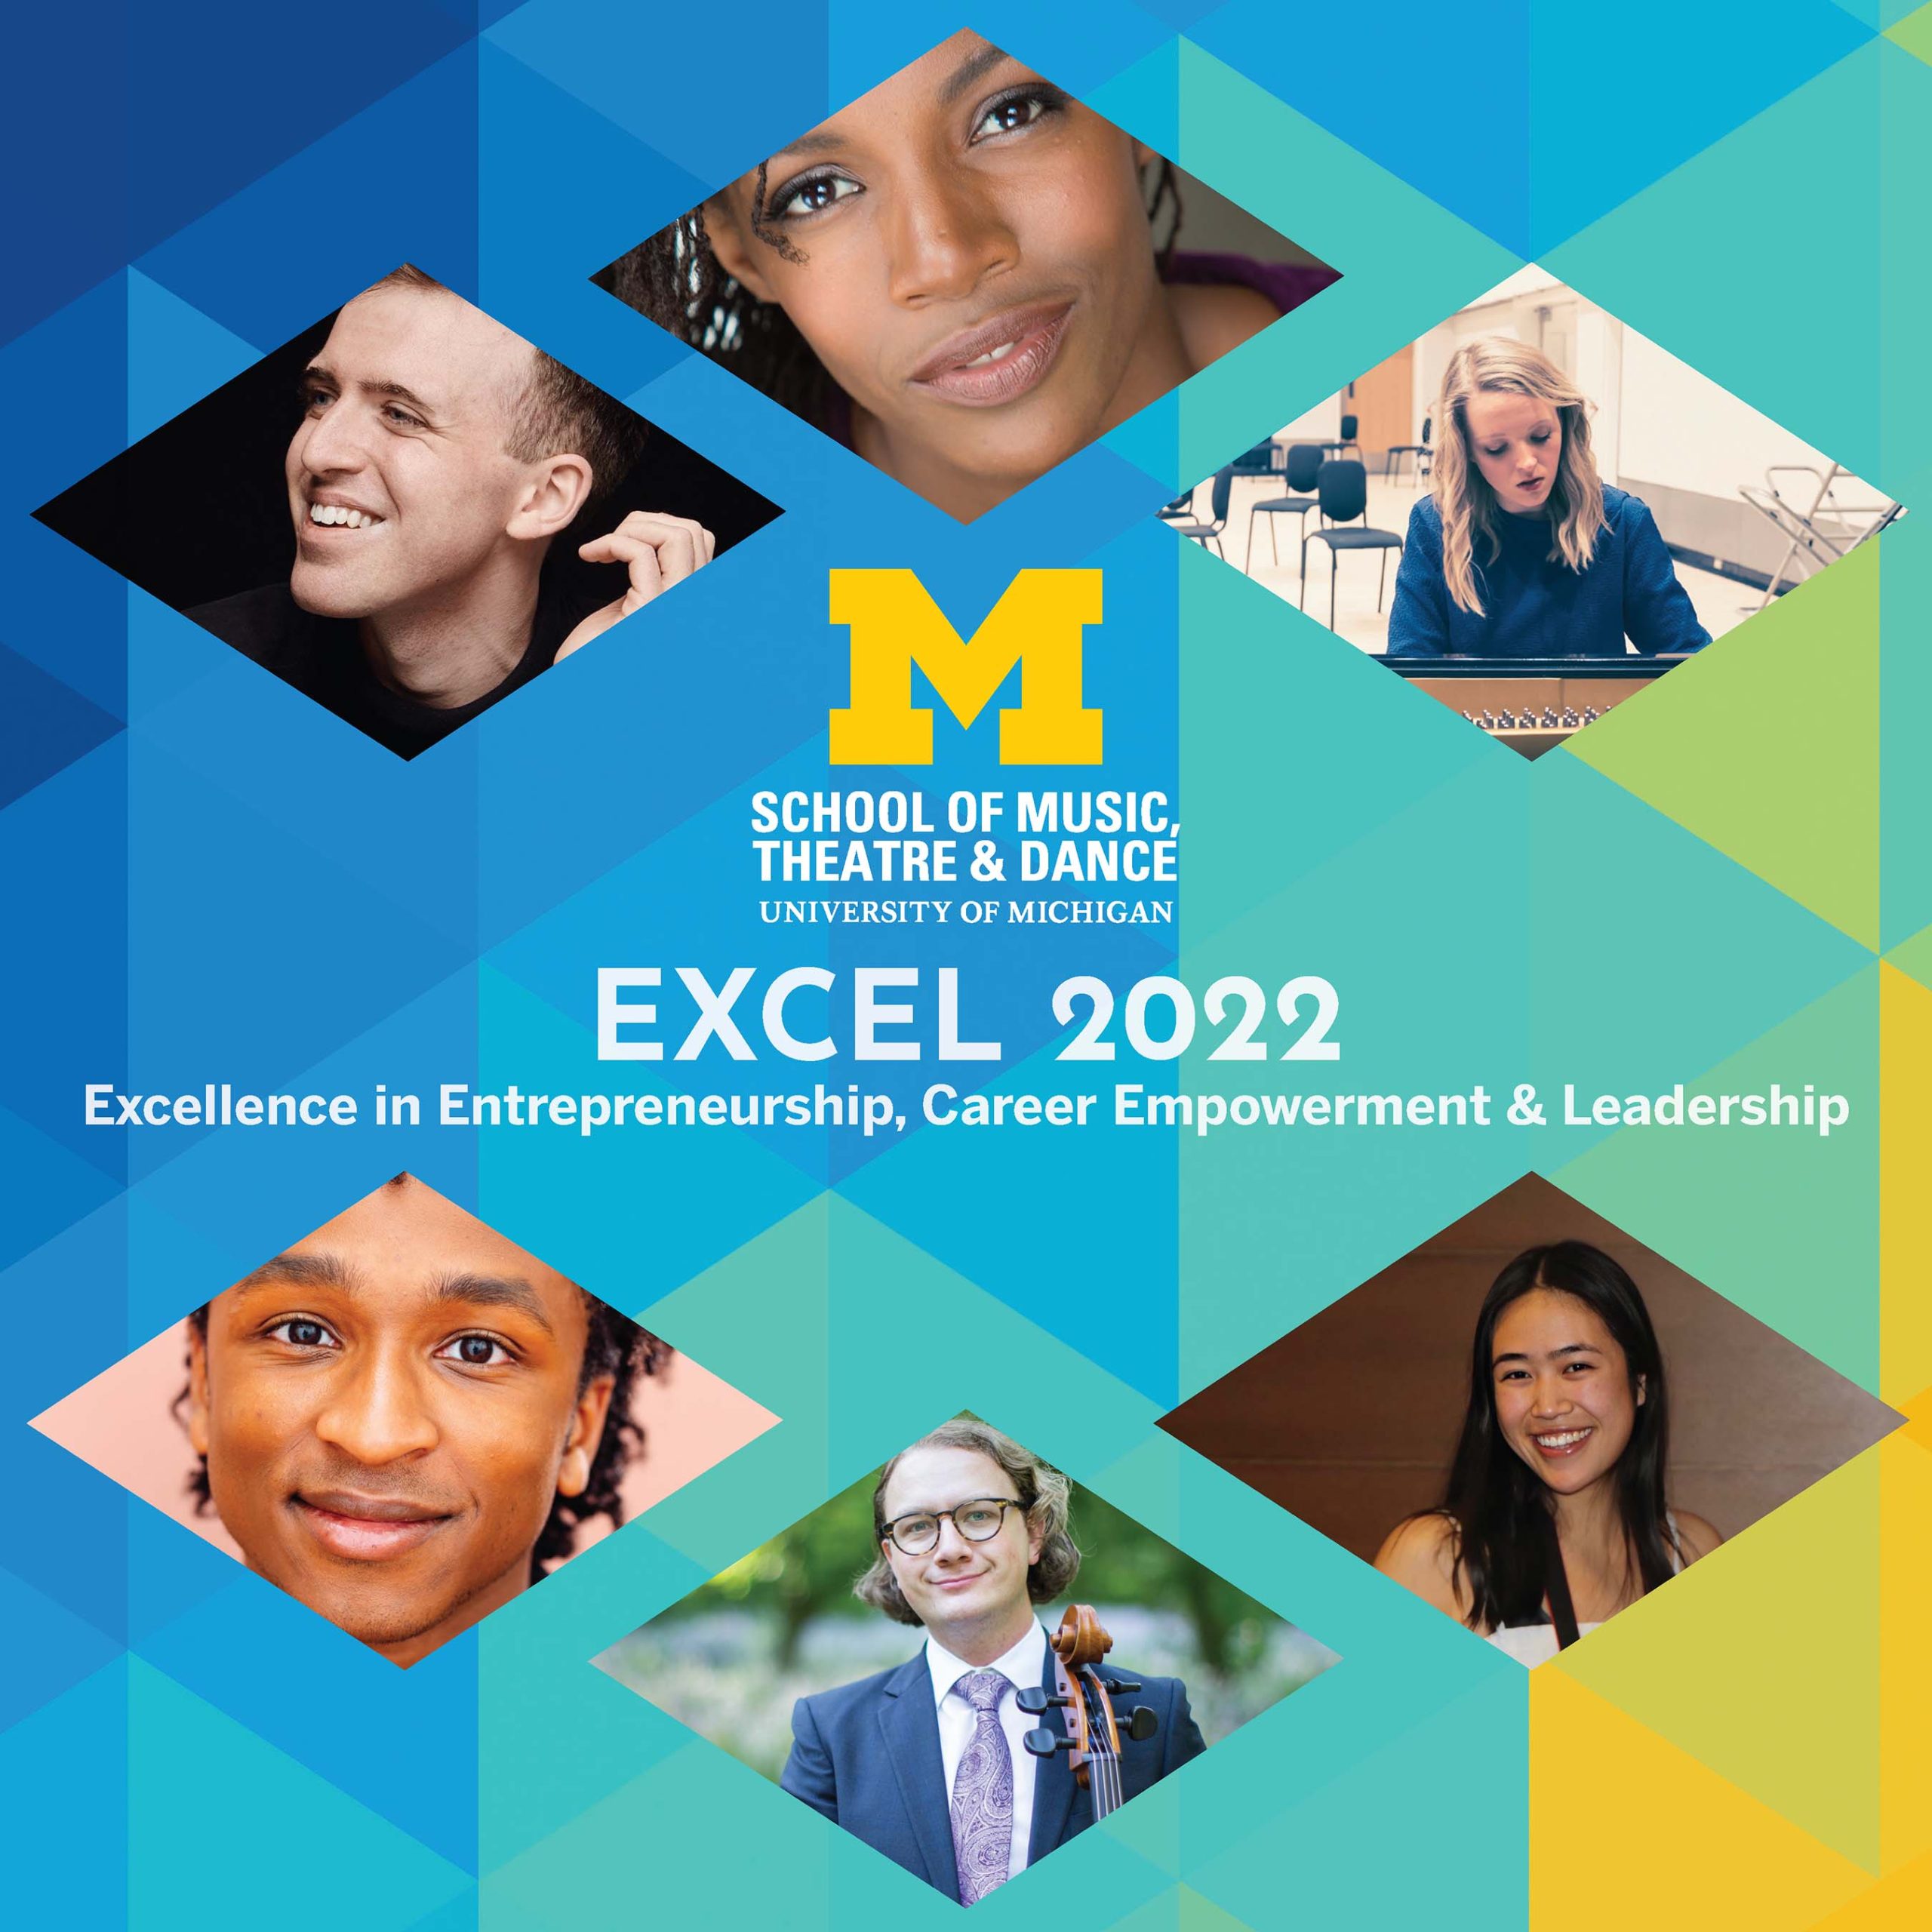 EXCEL 2022 Annual Report cover with logo, portraits of students